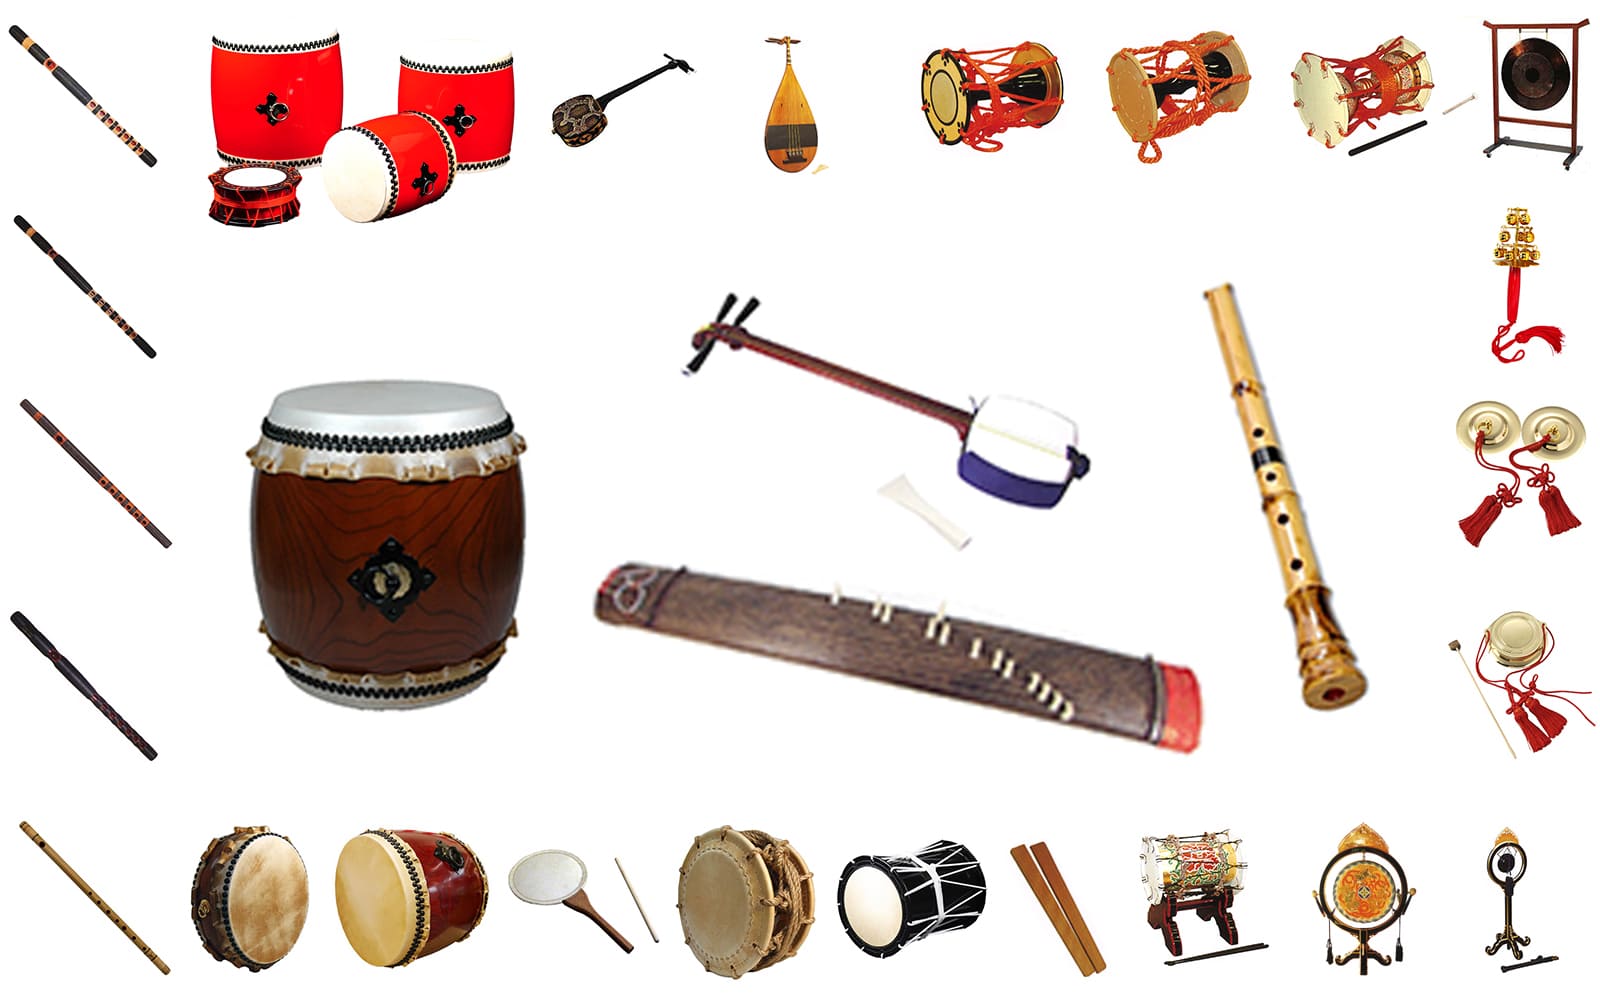 Guide to 33 Types of Traditional Japanese Instruments - For online